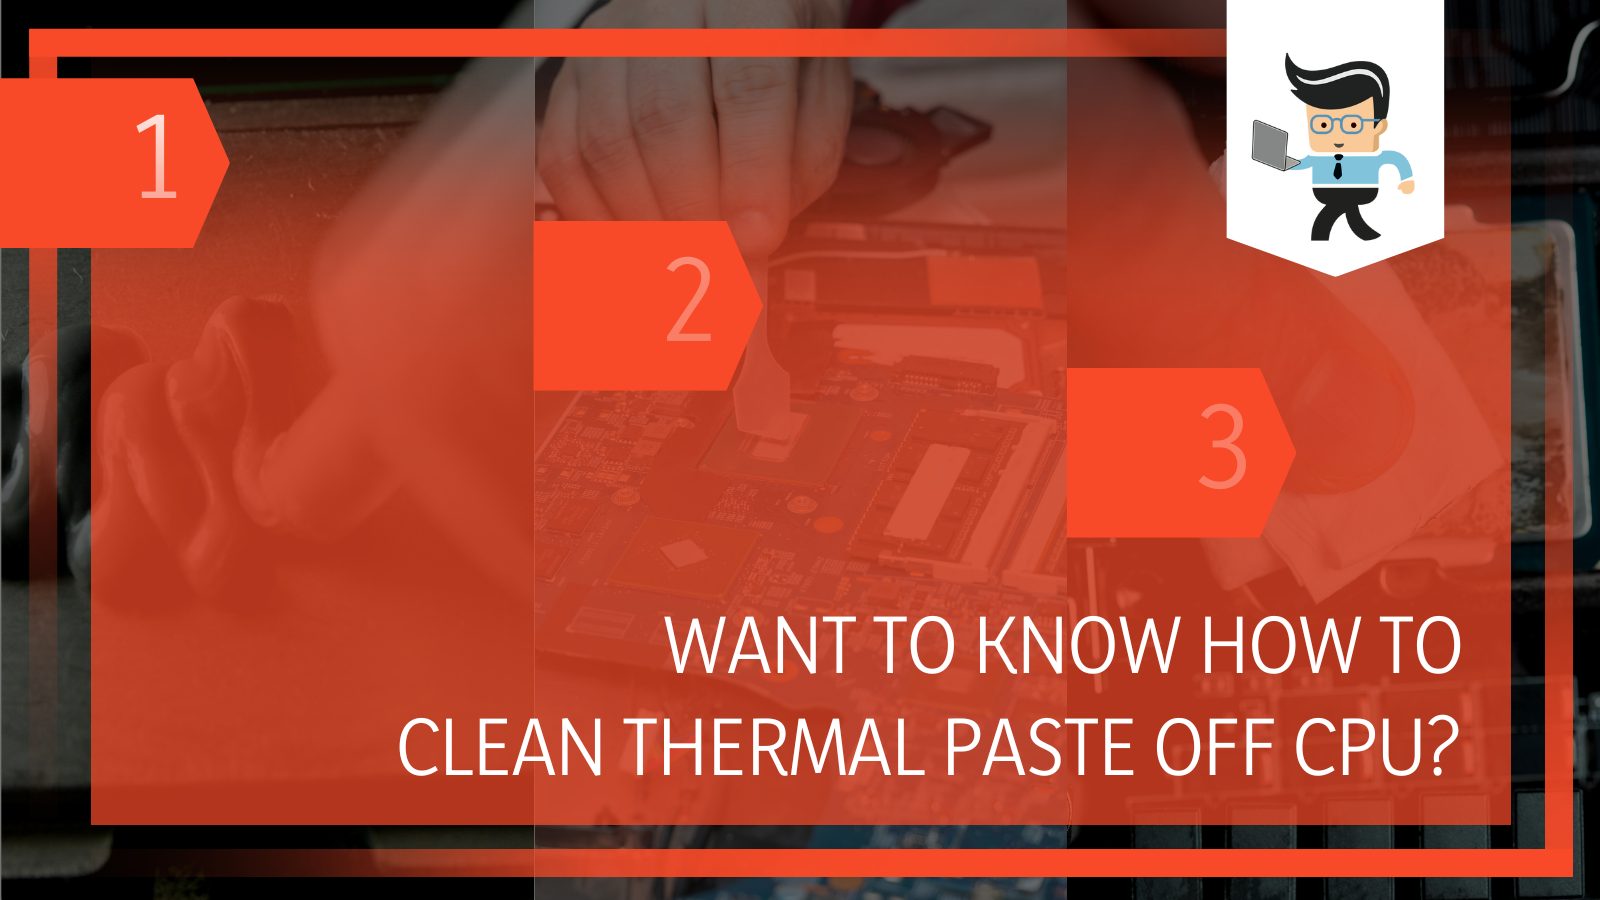 How To Clean Thermal Paste off CPU